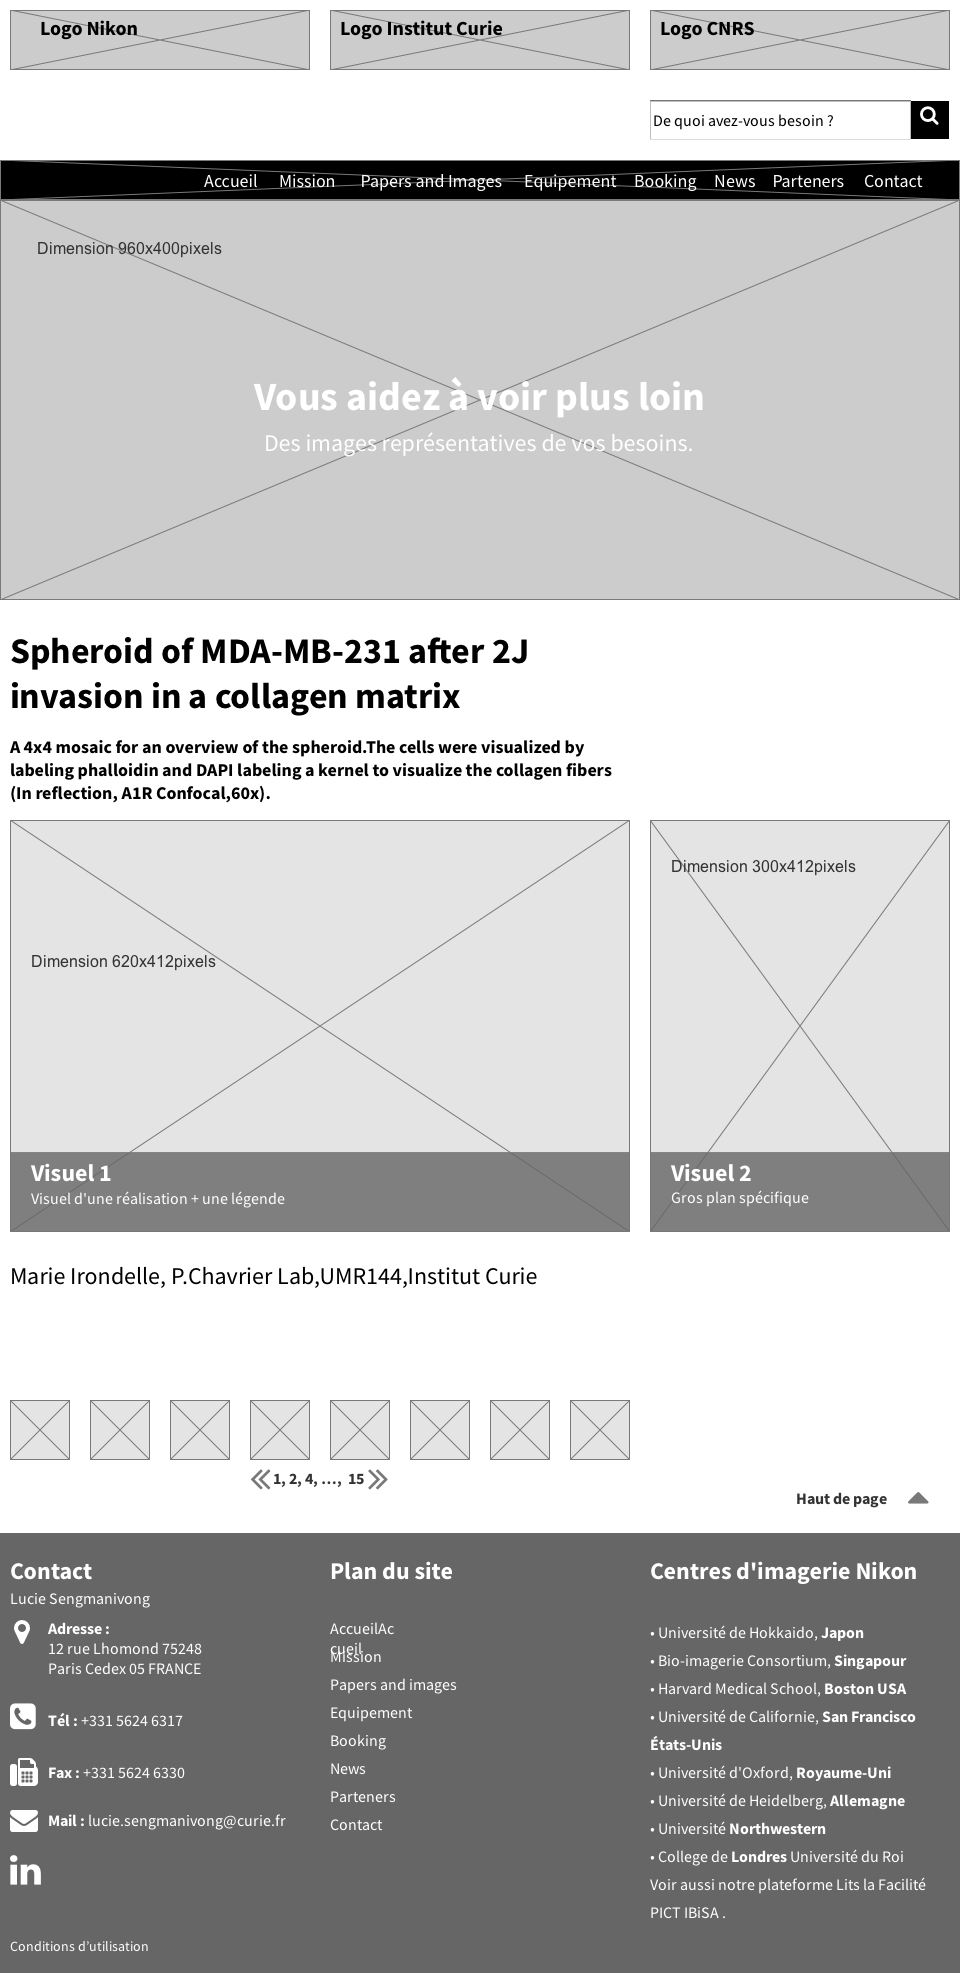 fiche_papers_images.png